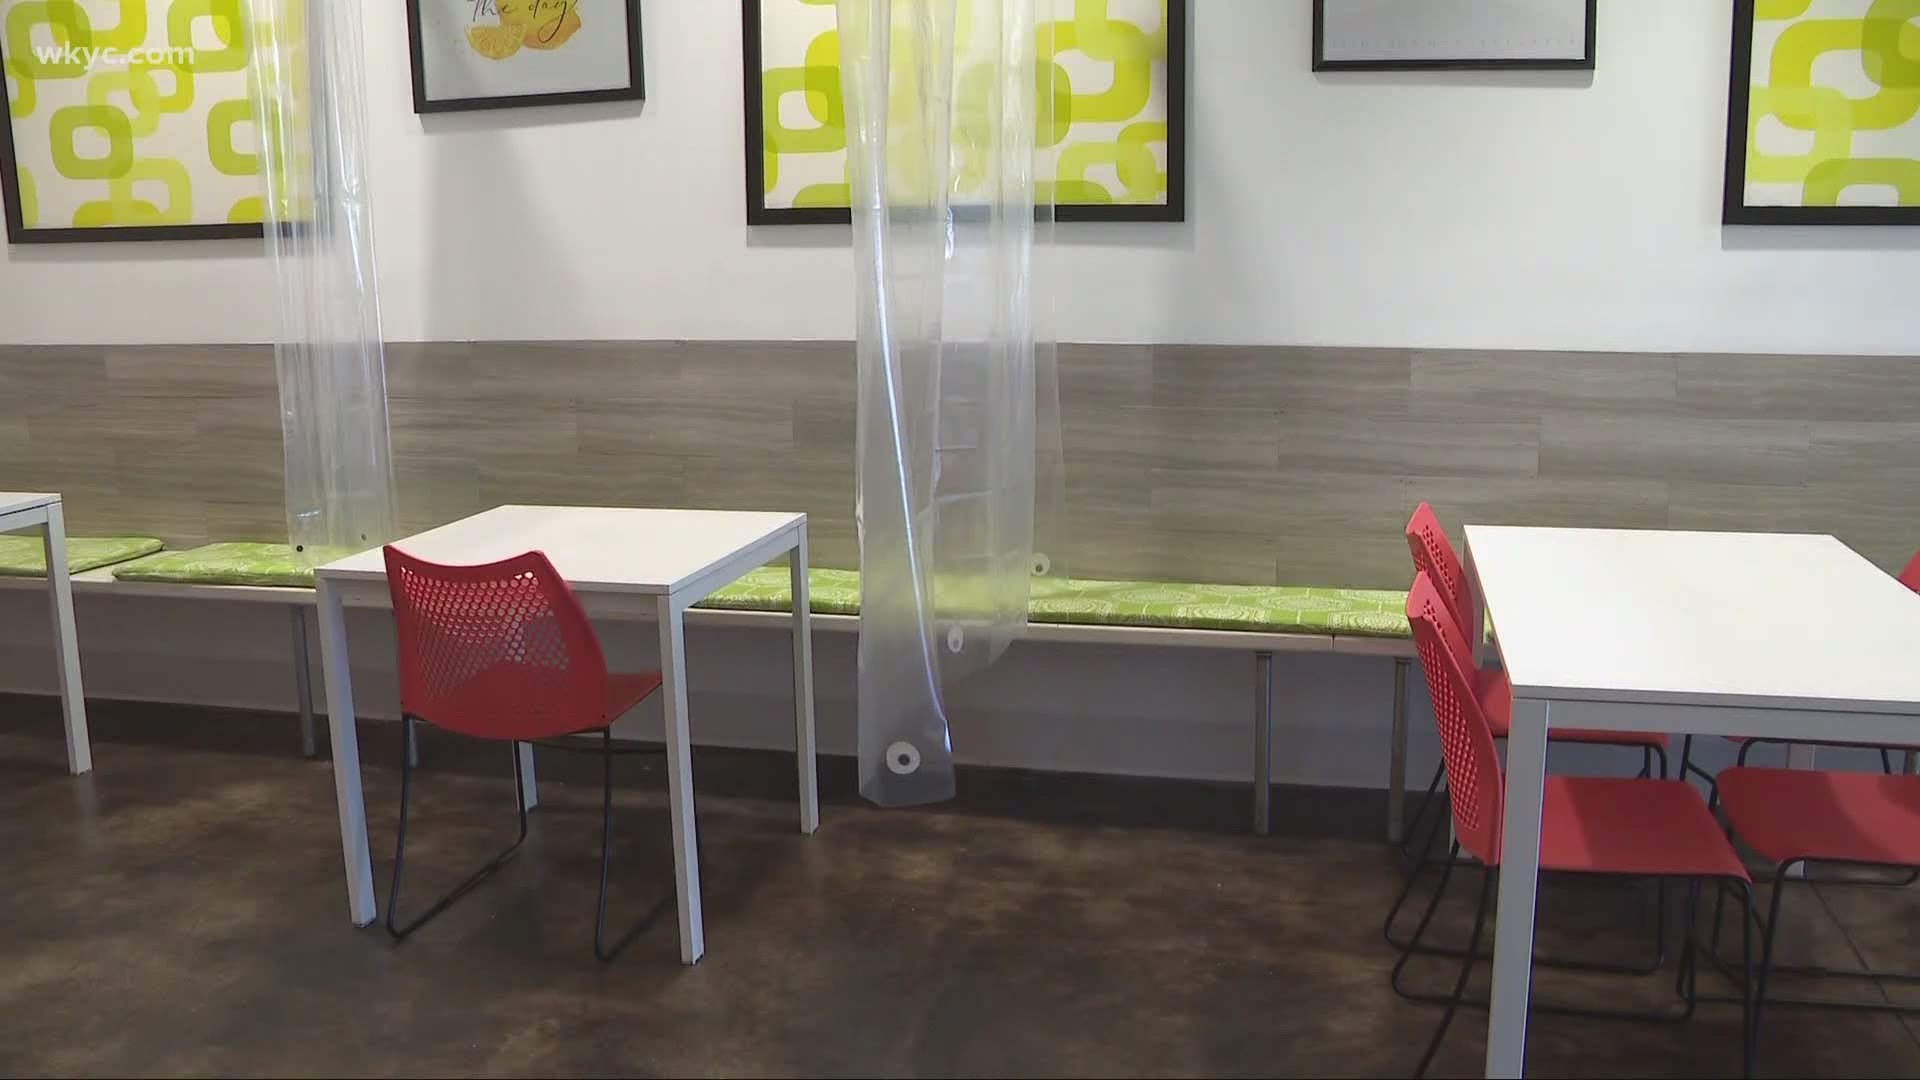 Short on space, Twisted Citrus hopes plastic barriers keep tables full. Mark Naymik reports.